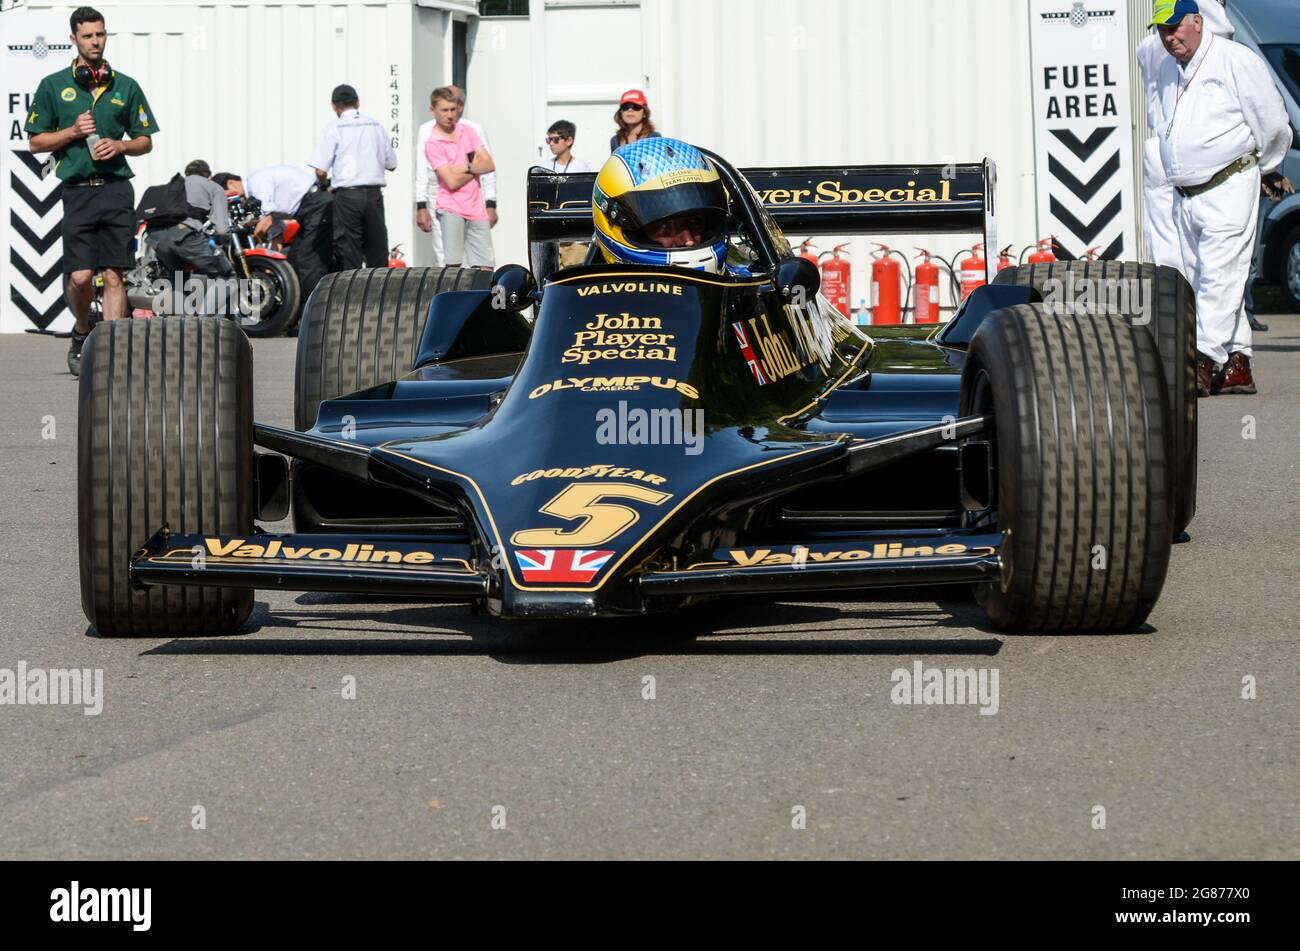 Lotus 79 Formula 1 Grand Prix racing car at the Goodwood Festival of Speed 2013. Classic John Player Special 1970s vintage F1 race car Stock Photo